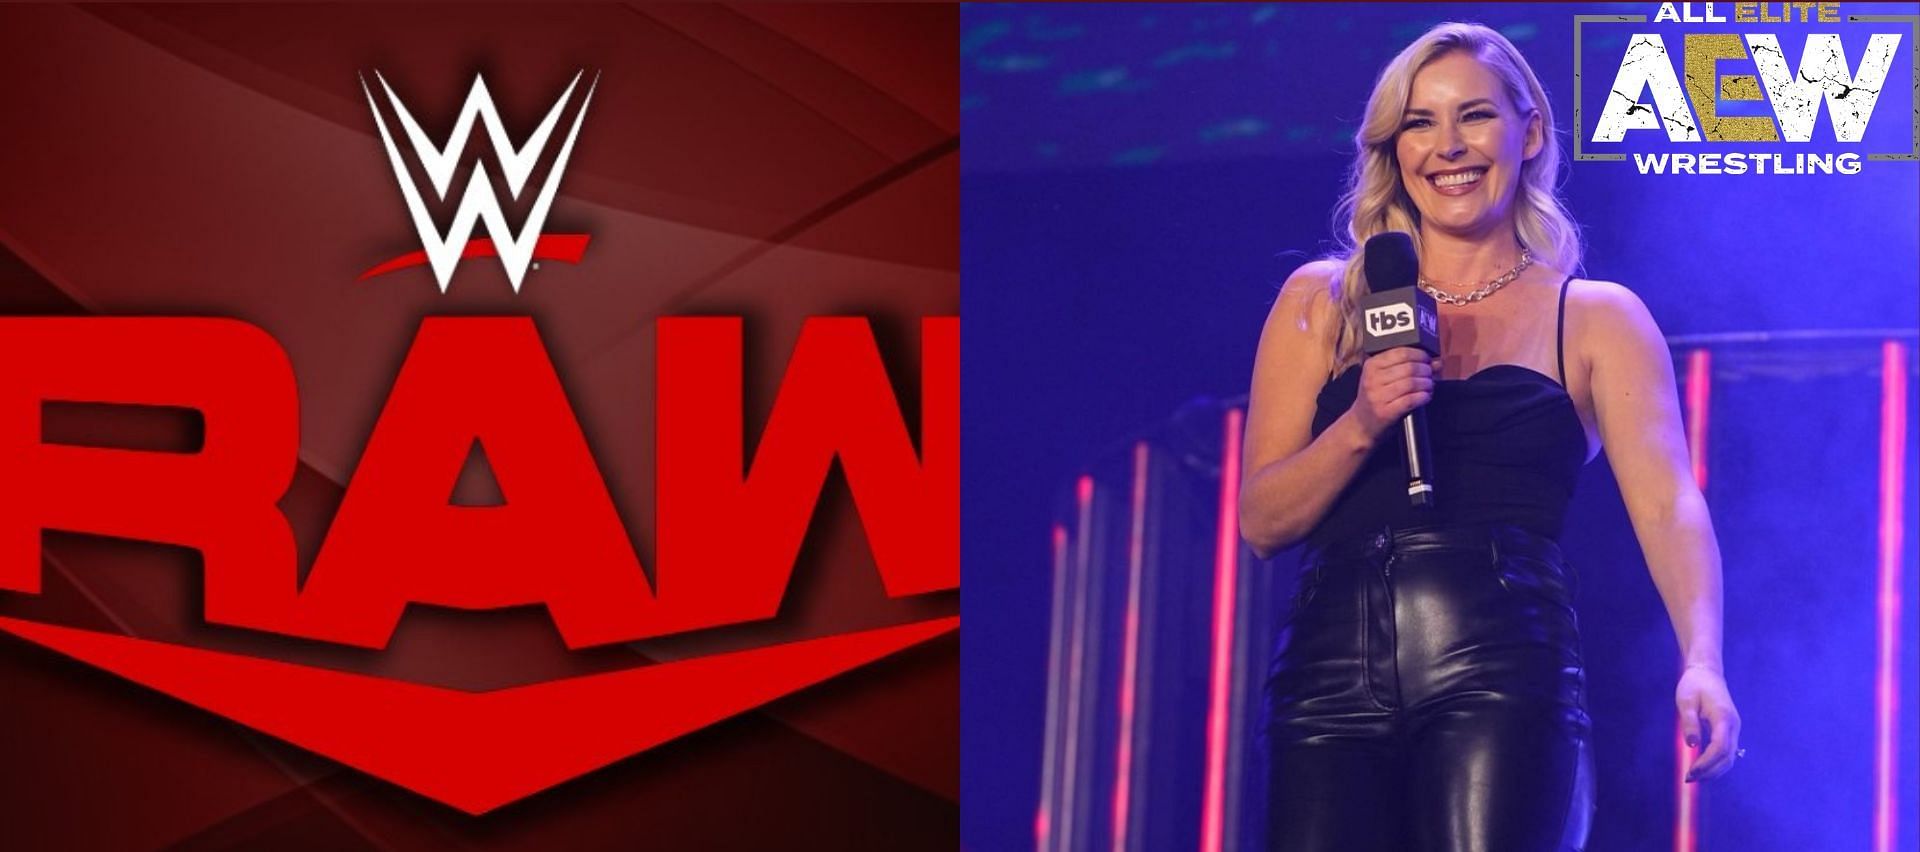 RAW logo (left), Renee Paquette (right)